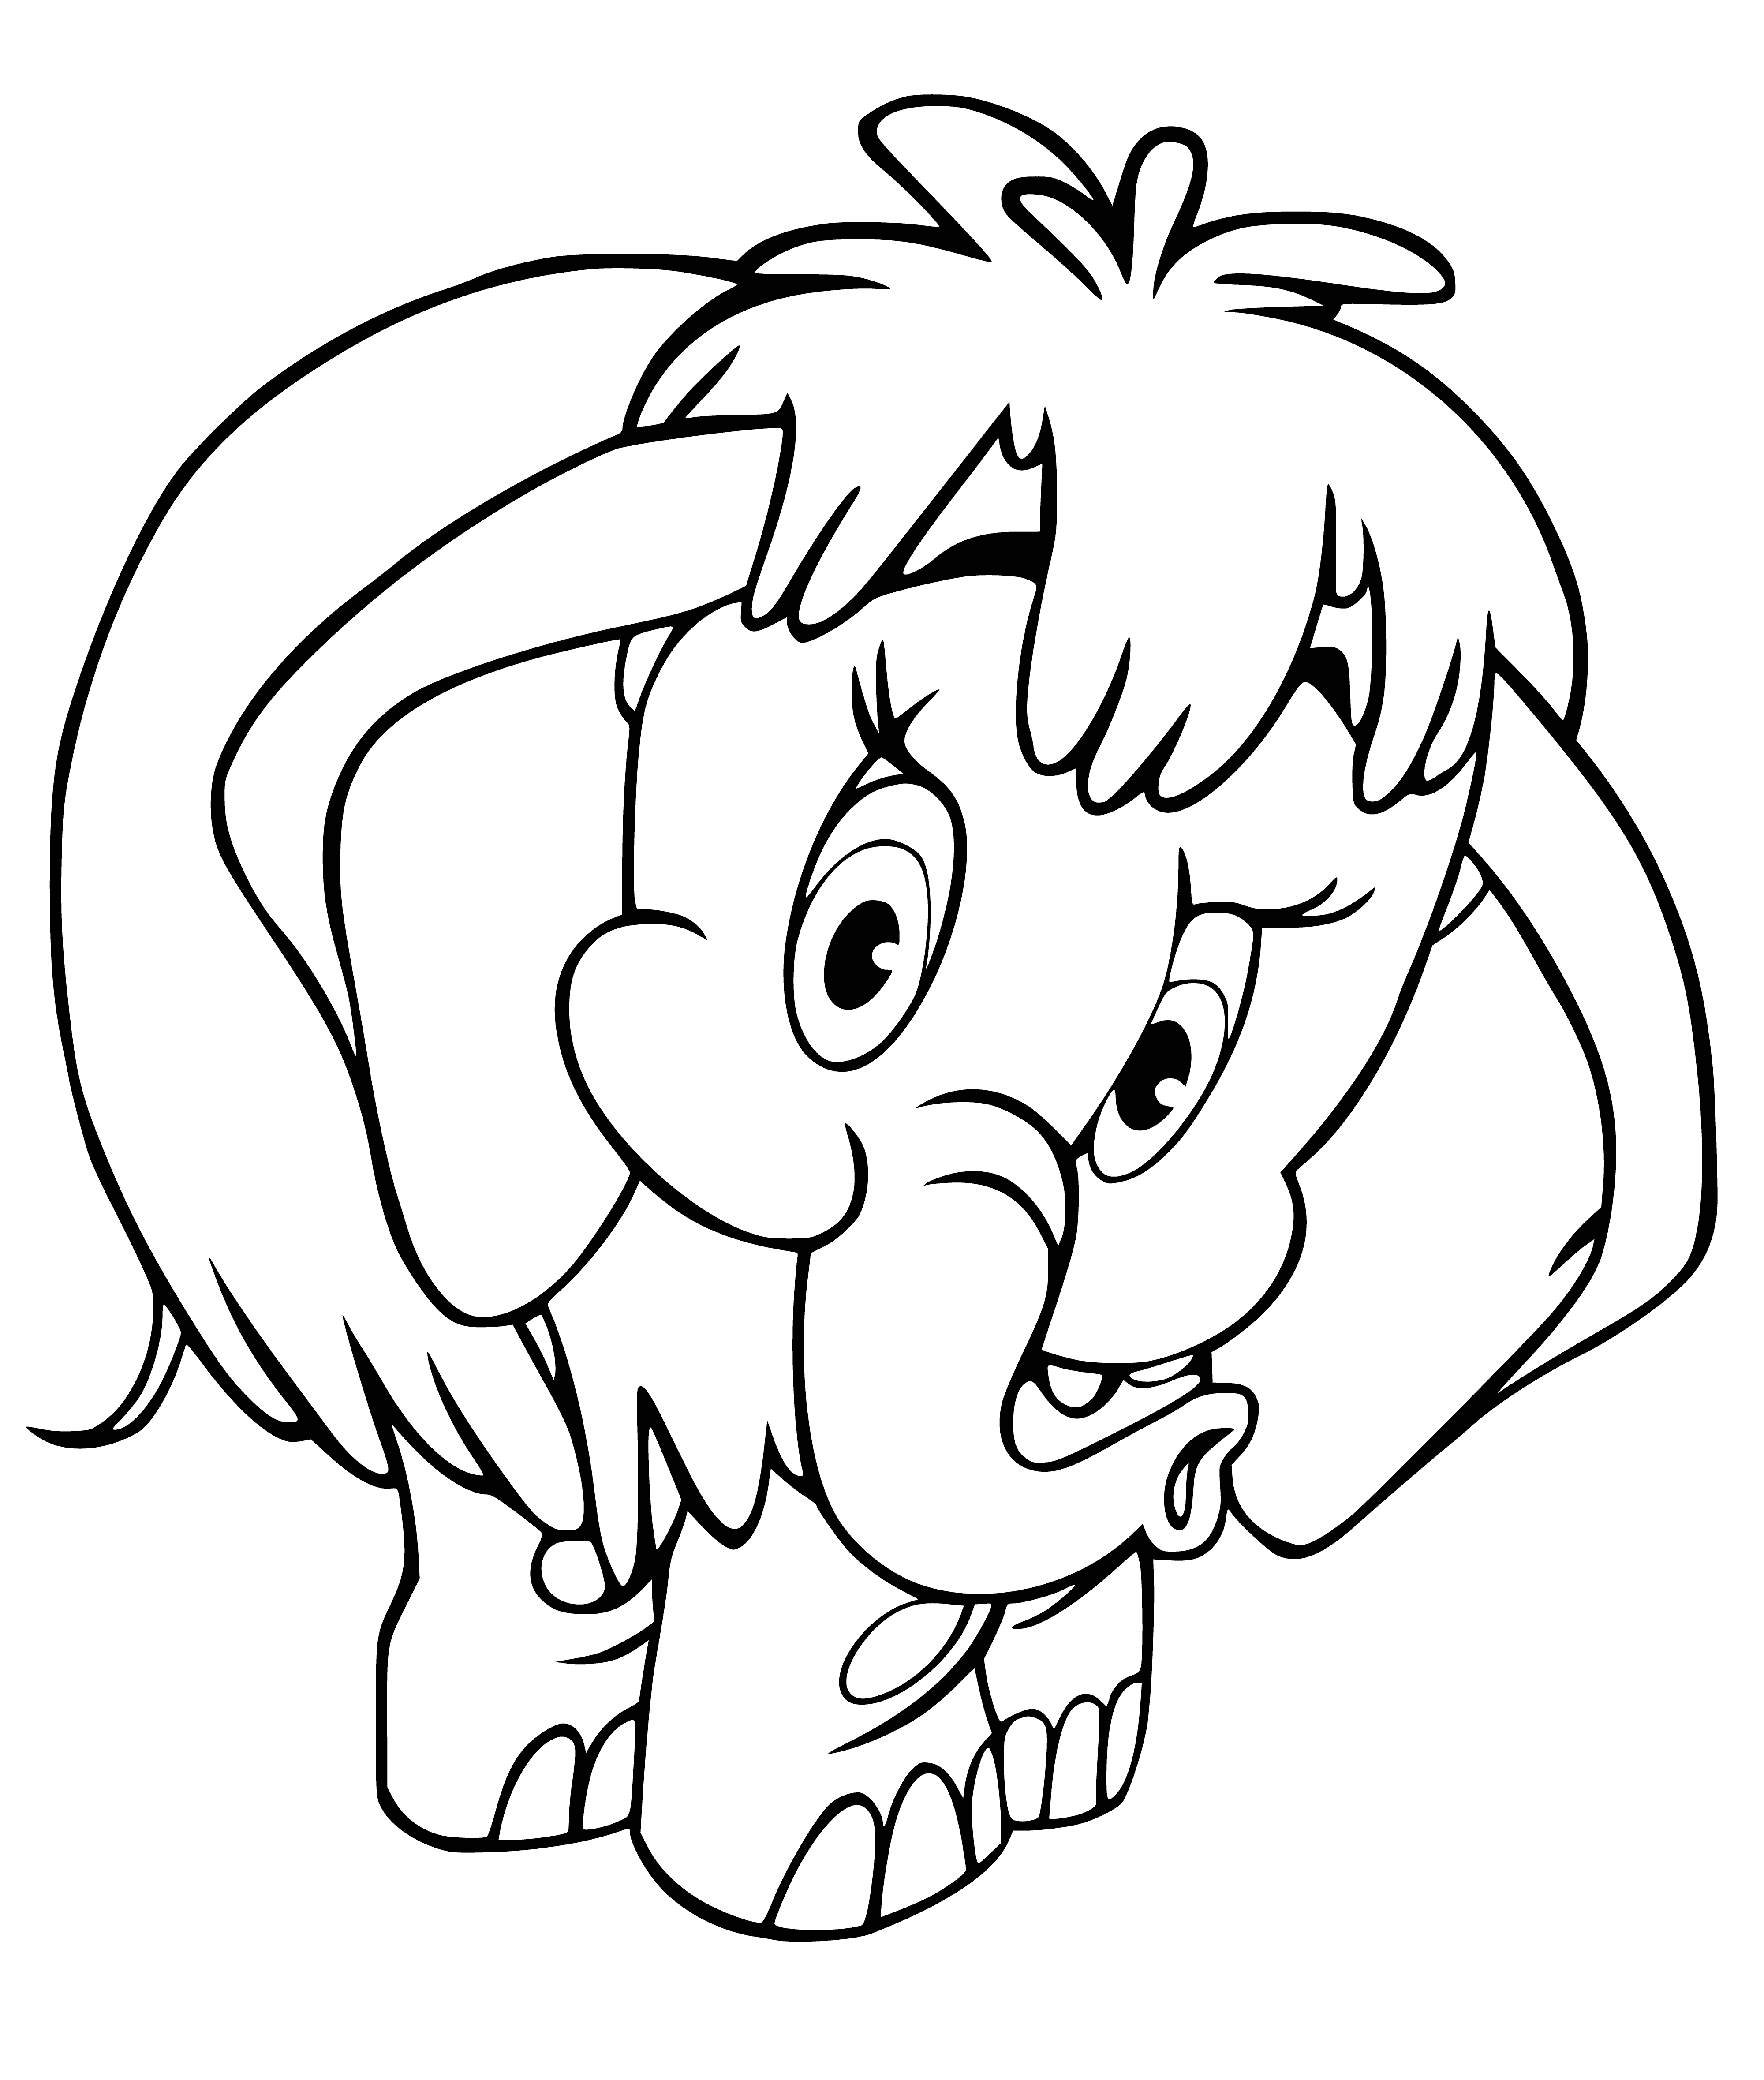 coloring page: Mammoths are huge animals with long trunks, big ears & thick fur that helps them stay warm in cold weather.